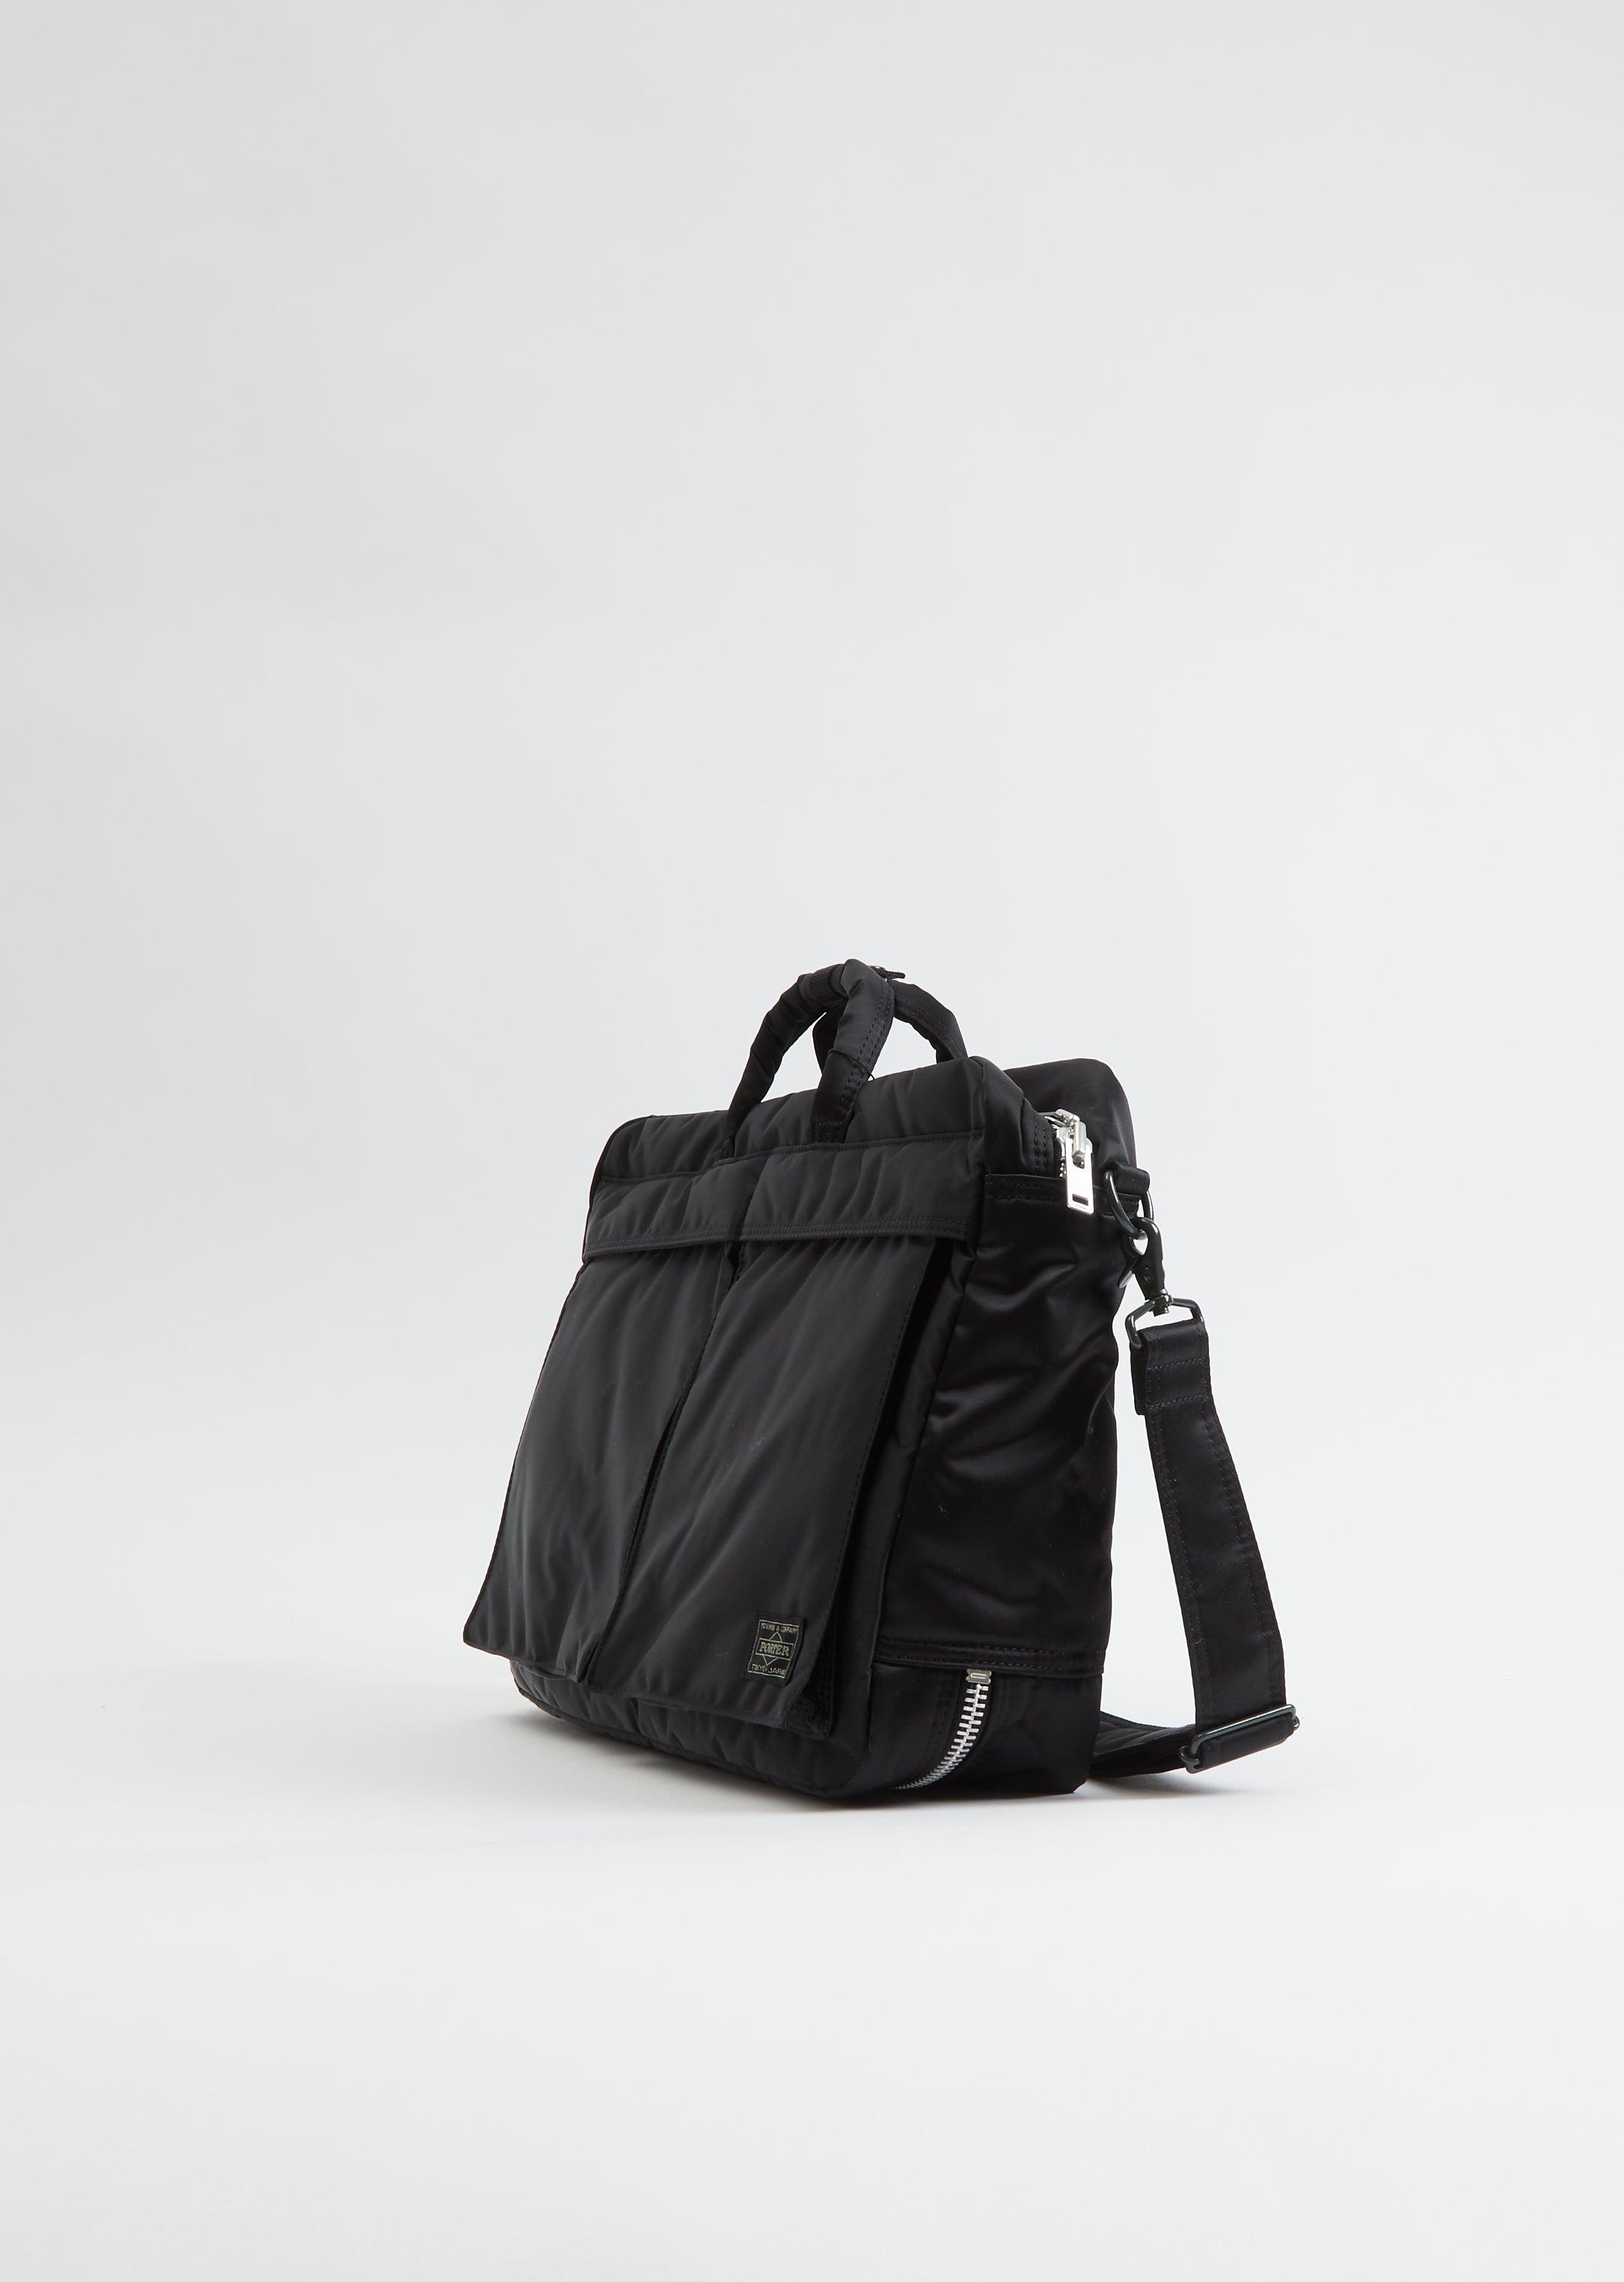 Porter-Yoshida and Co Tanker 3-way Briefcase in Black | Lyst